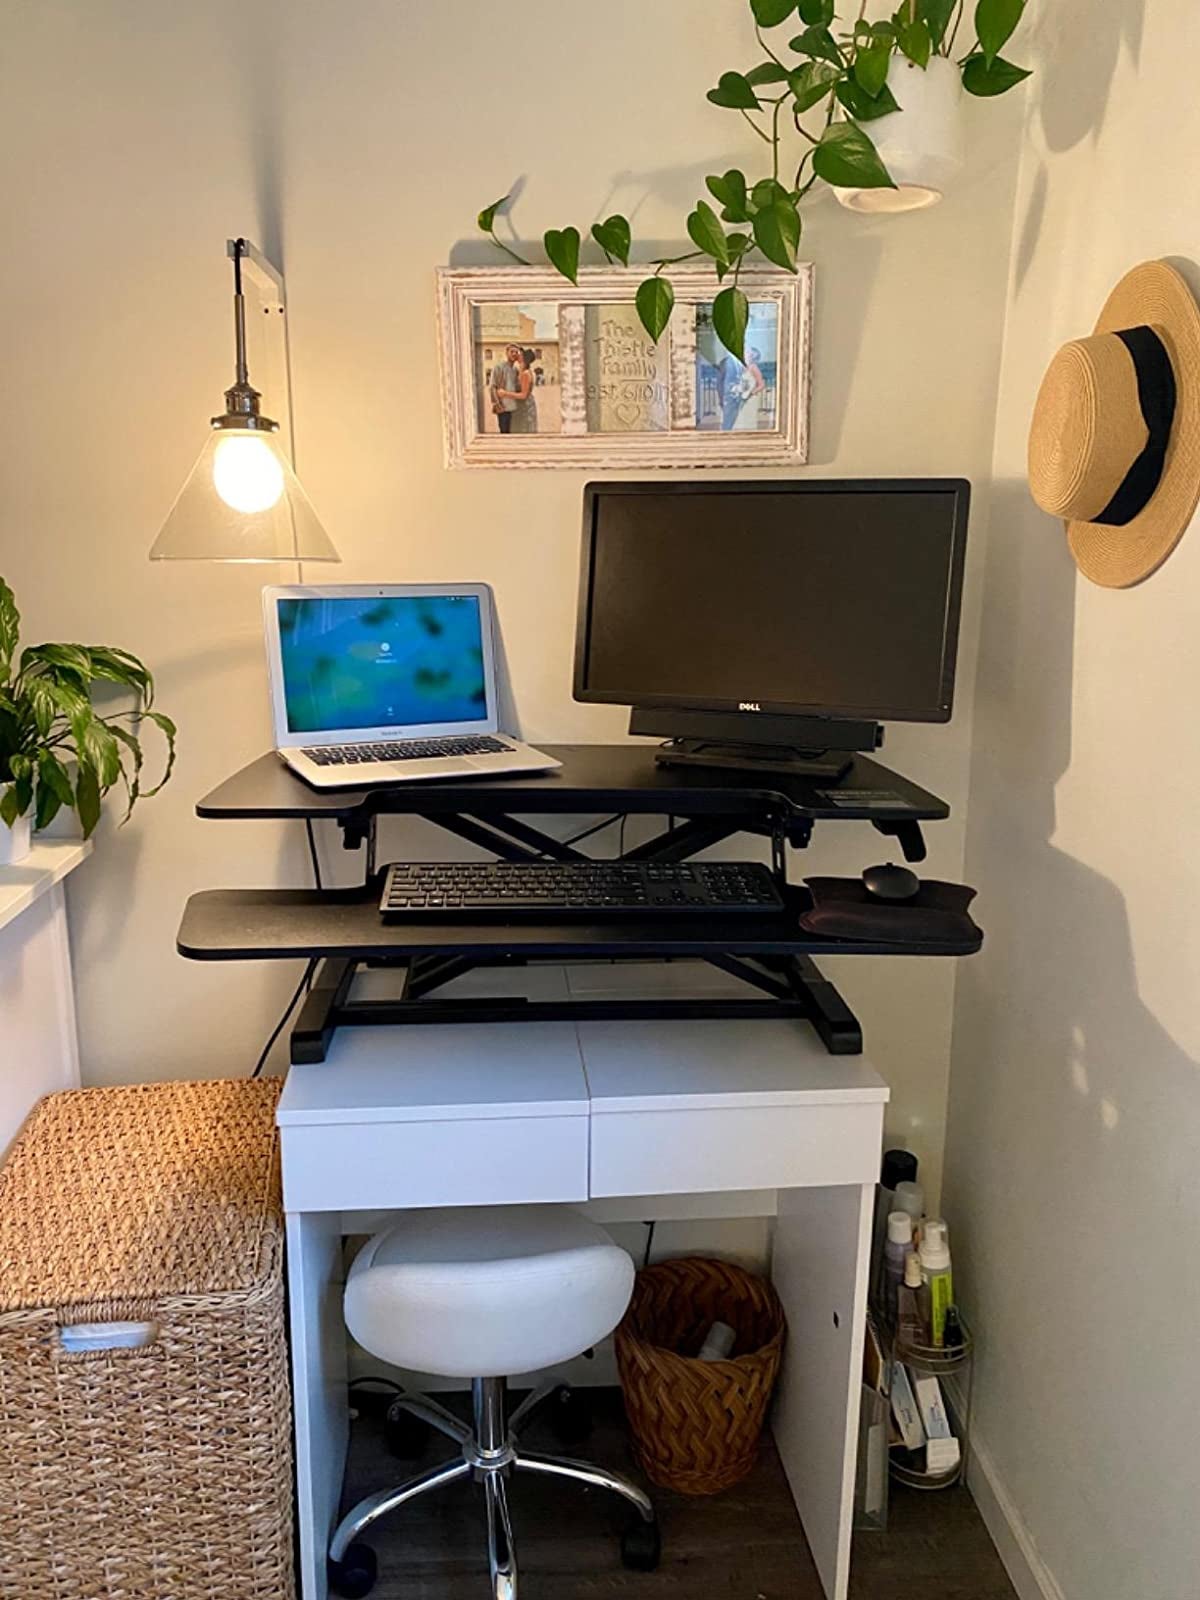 black standing desk converter with black monitor, laptop, and keyboard on small white desk